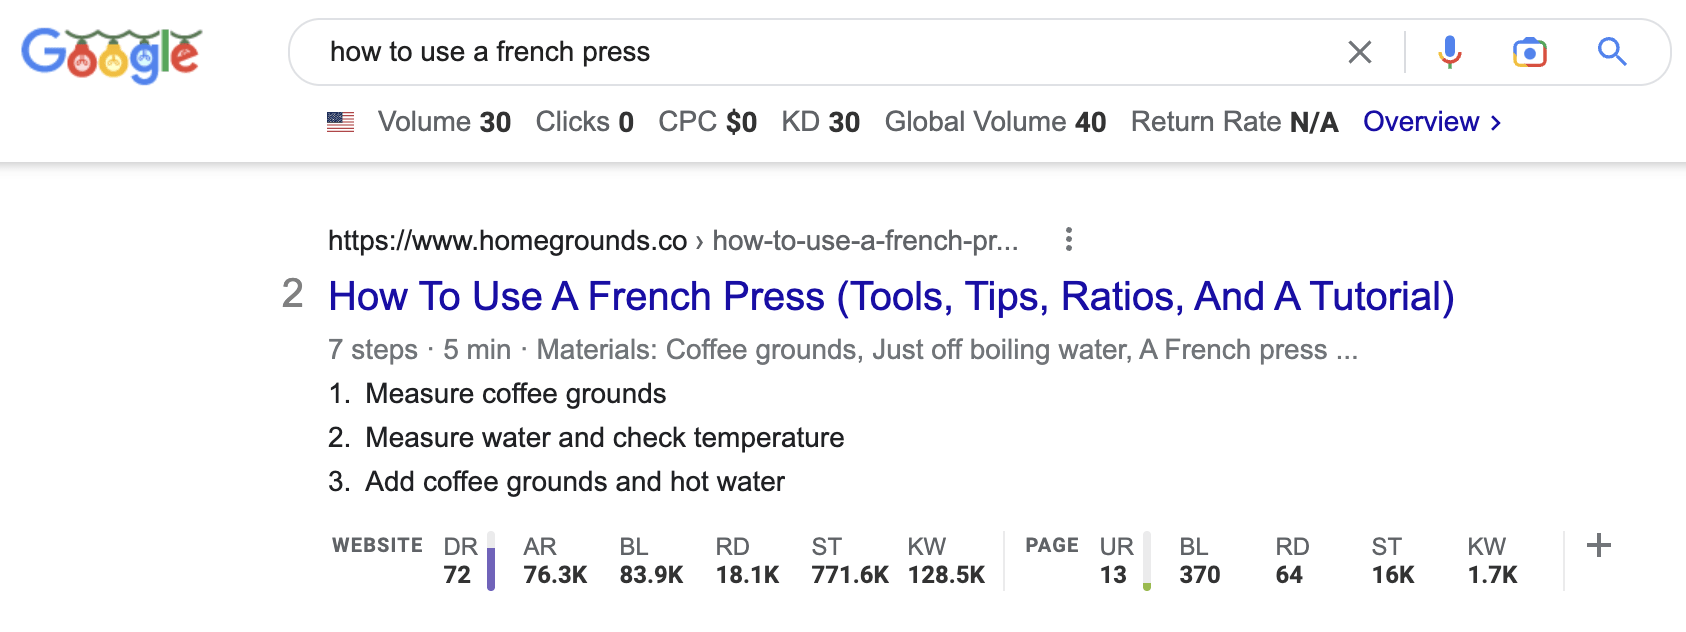 Google SERP for "how to use a french press" 